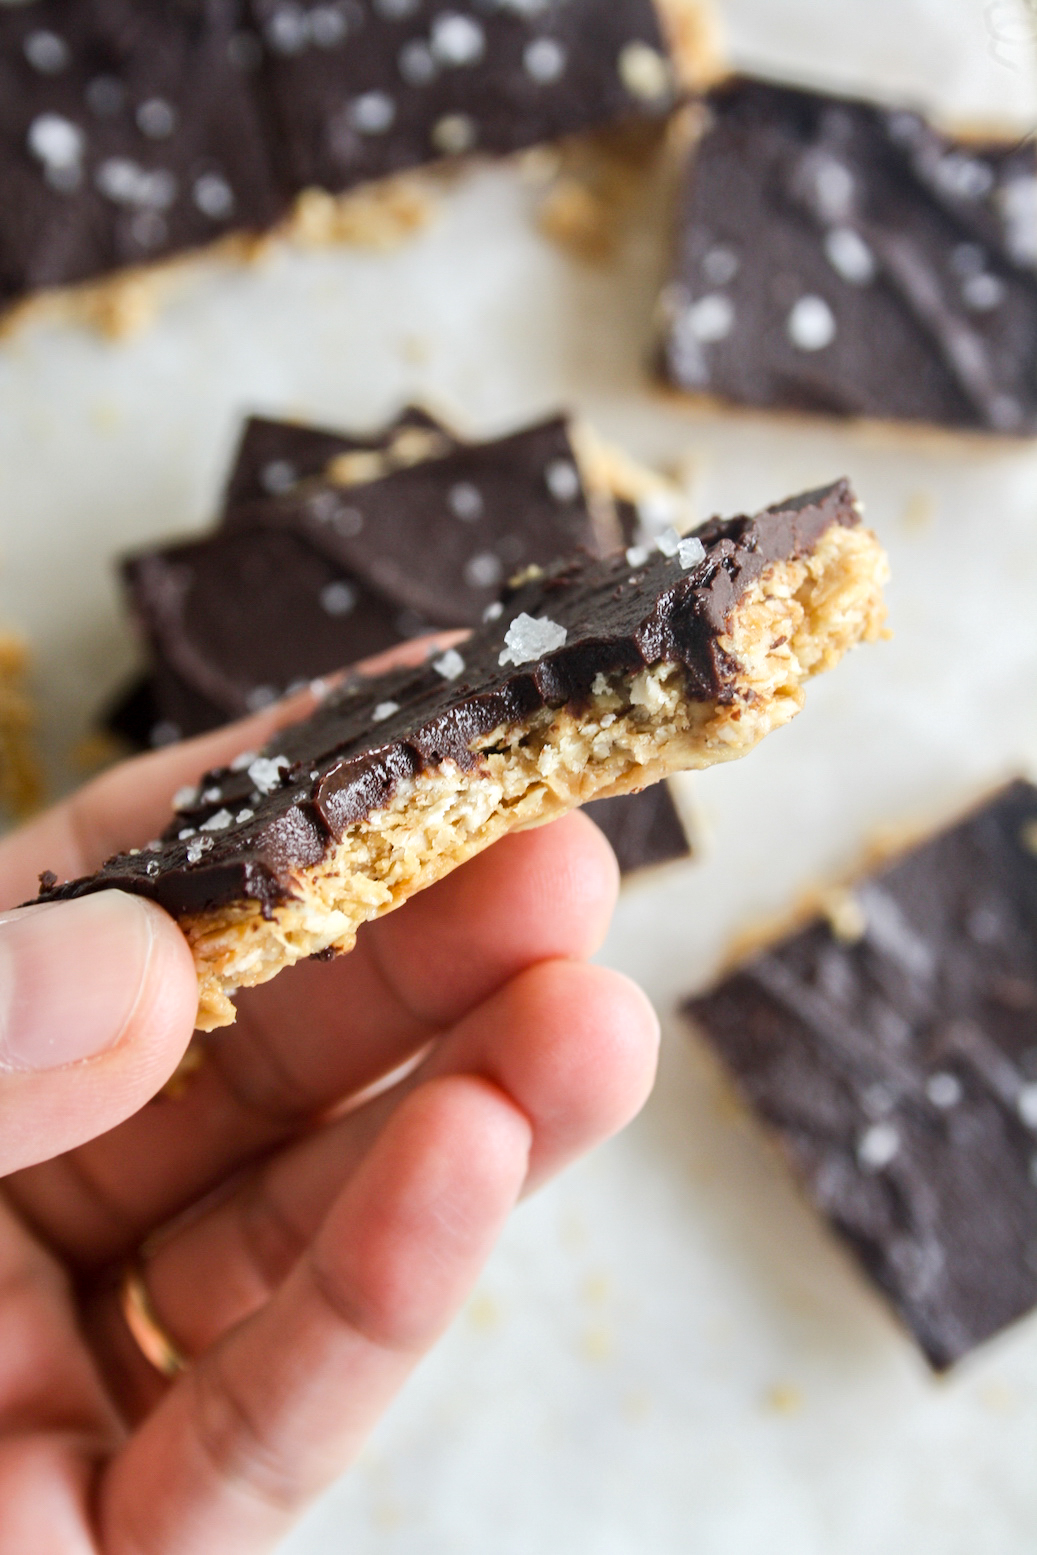 Chewy, healthy peanut butter oat bars with salted chocolate!